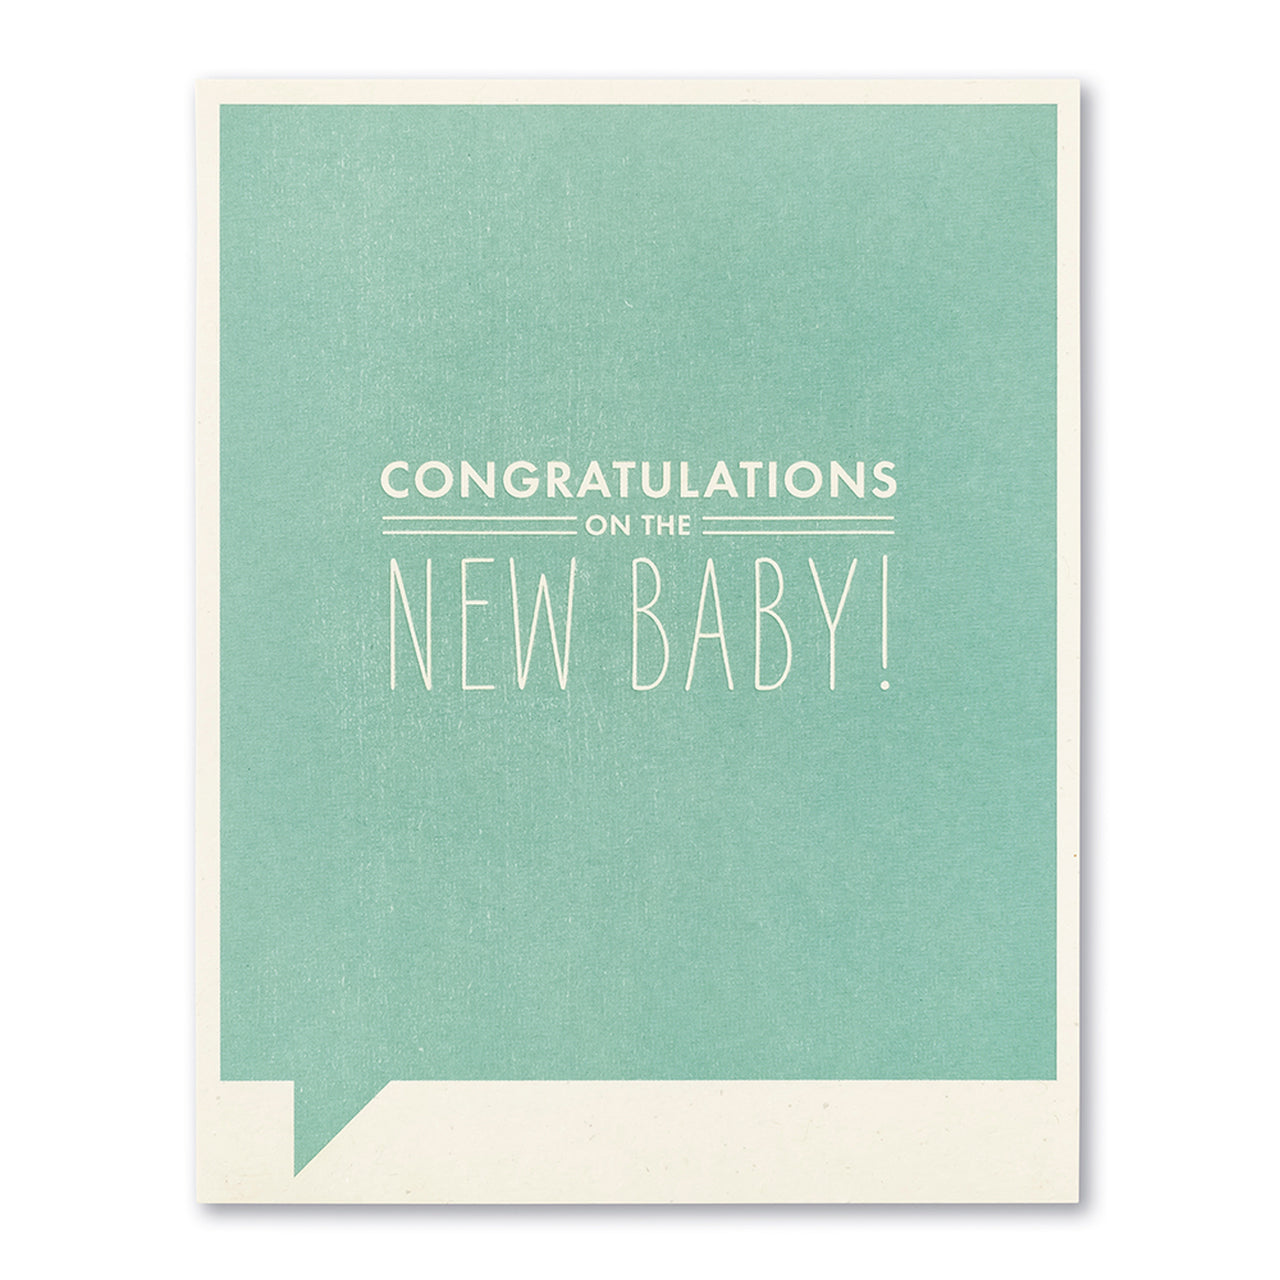 Frank and Funny Greeting Card - New Baby - Congratulations on the new baby! - Mellow Monkey